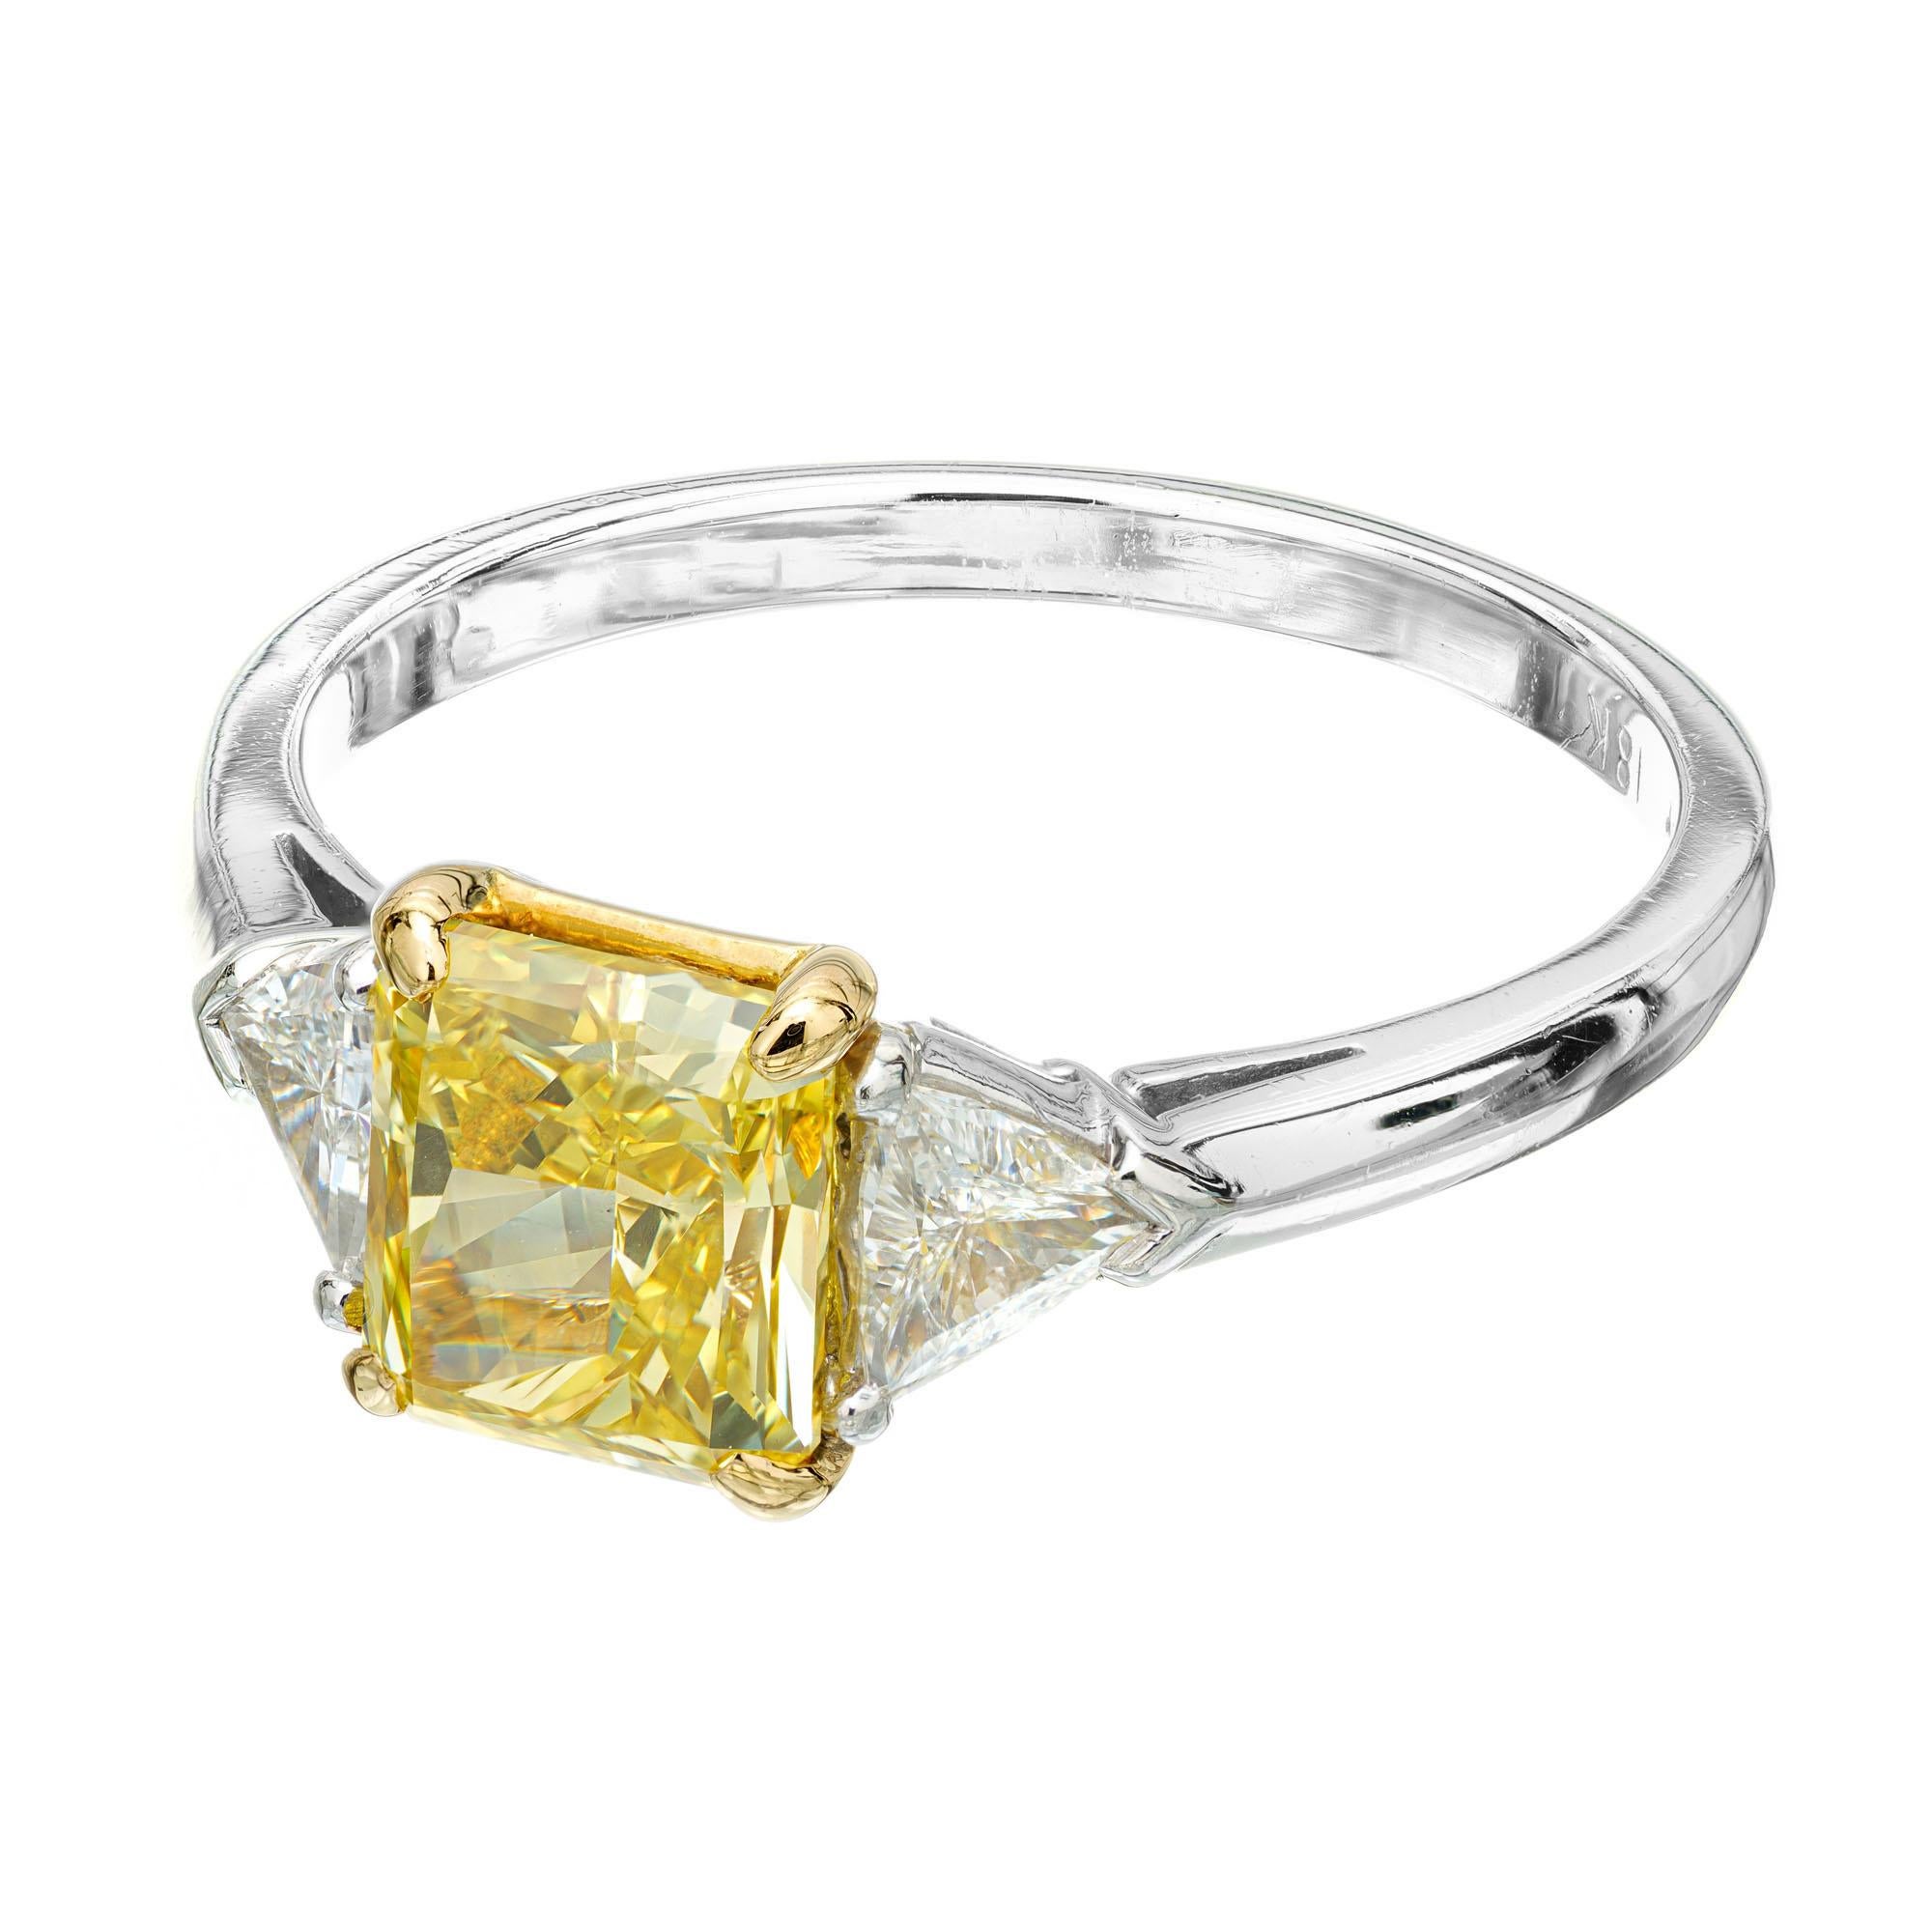 1.46 Carat Fancy Yellow Diamond Three-Stone Platinum Engagement Ring In Excellent Condition For Sale In Stamford, CT